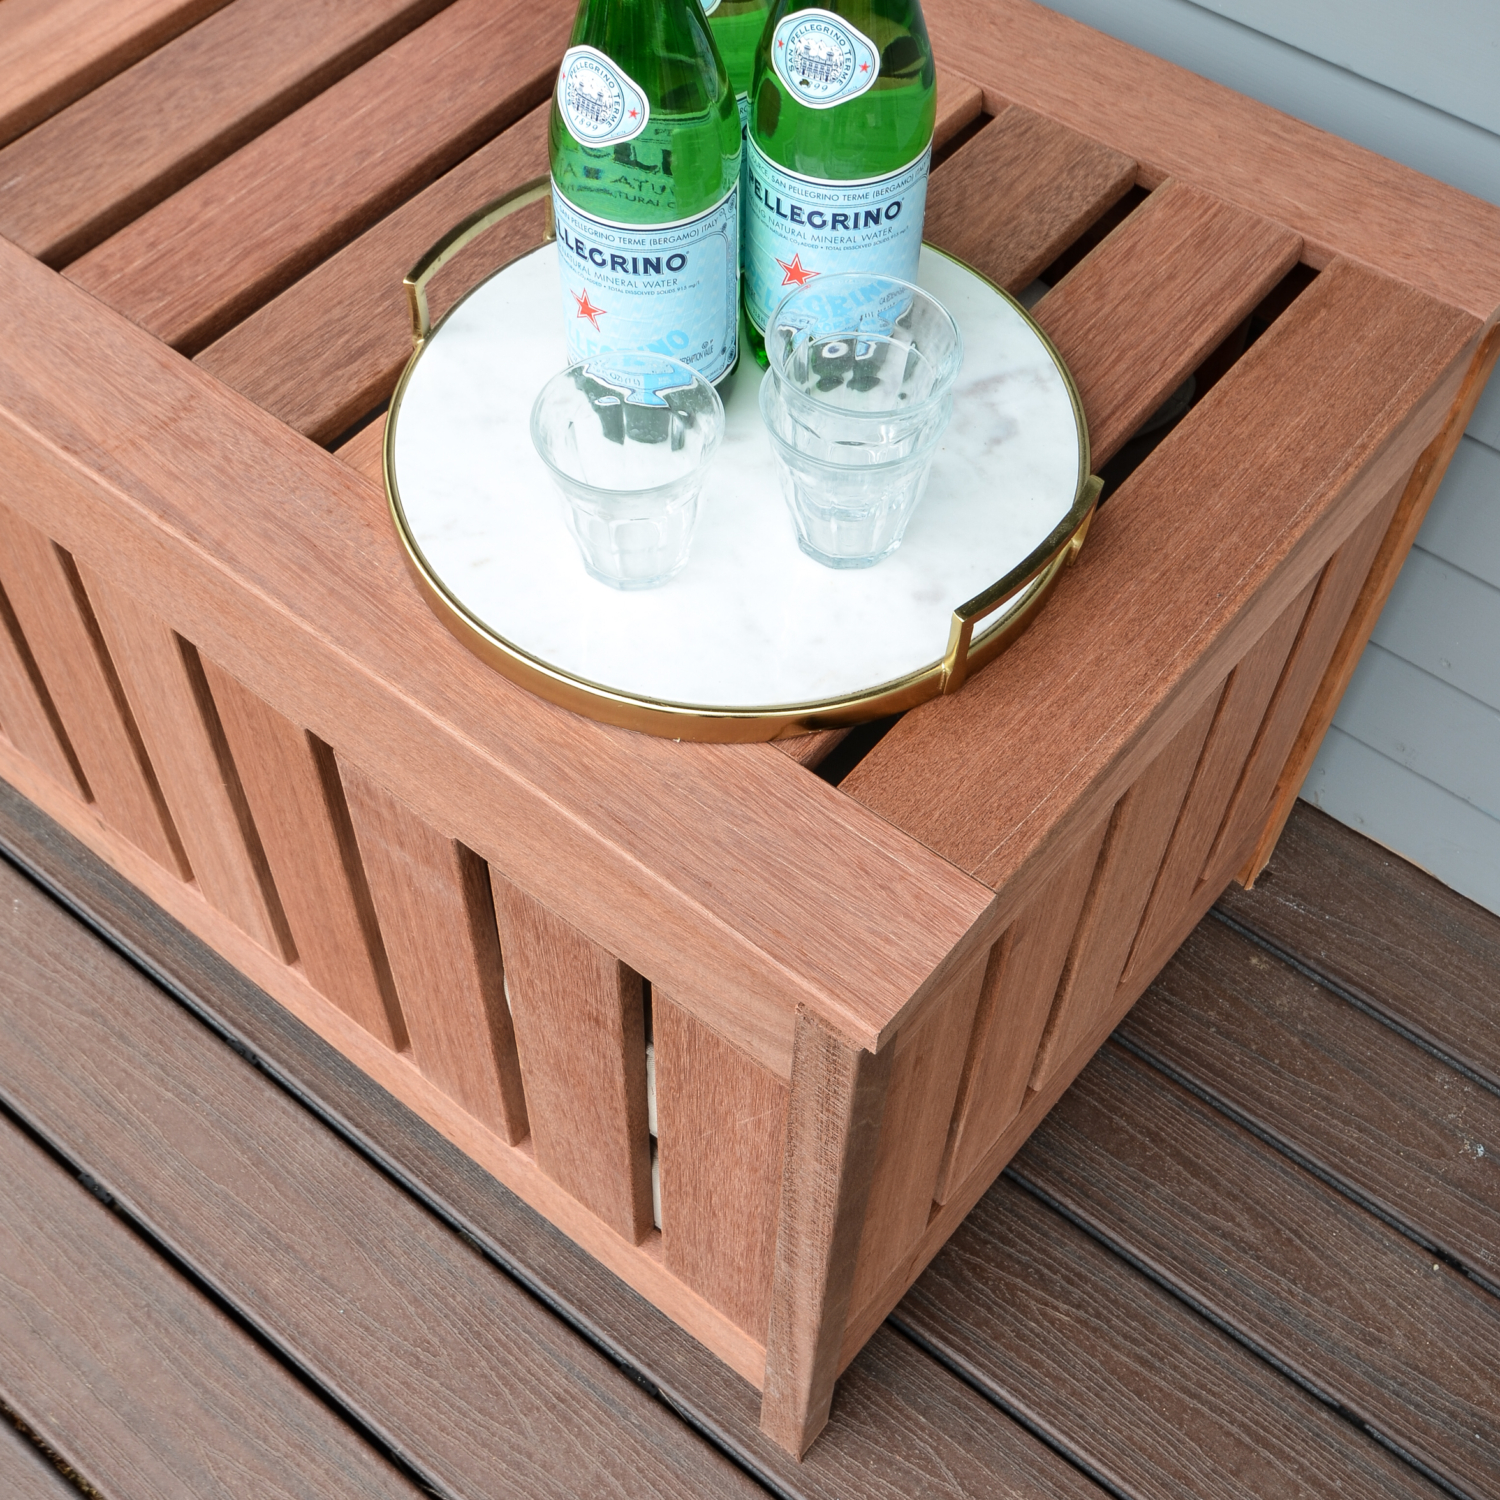 FREE plans for making a DIY outdoor storage box for outdoor cushions! Plus, it doubles as an outdoor bench seat and serving surface.